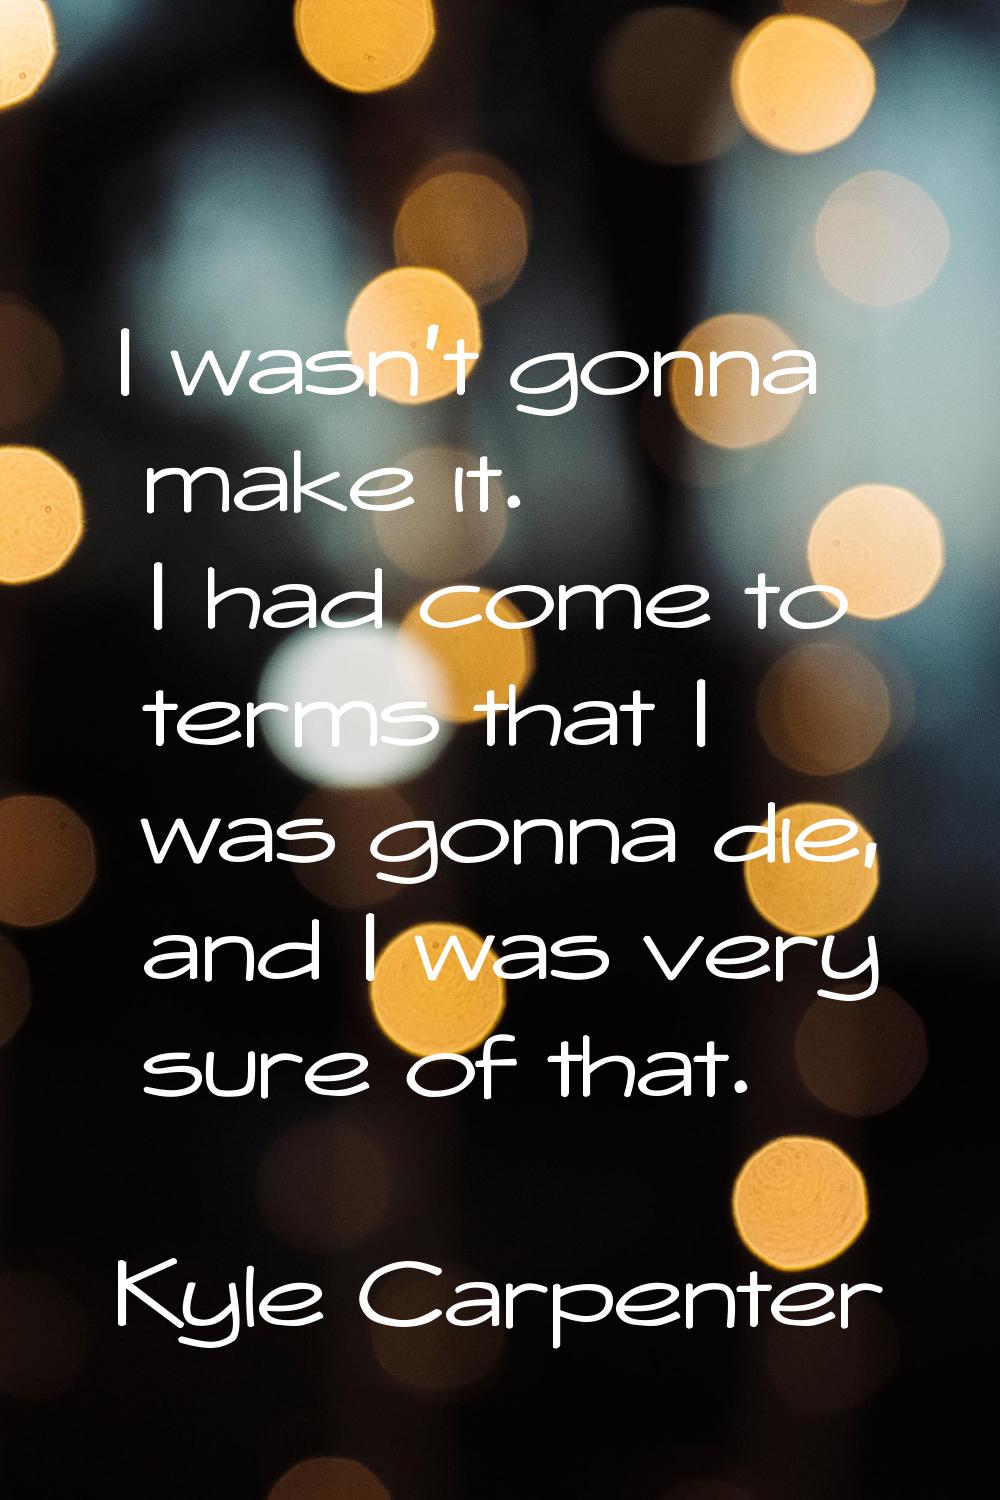 I wasn't gonna make it. I had come to terms that I was gonna die, and I was very sure of that.